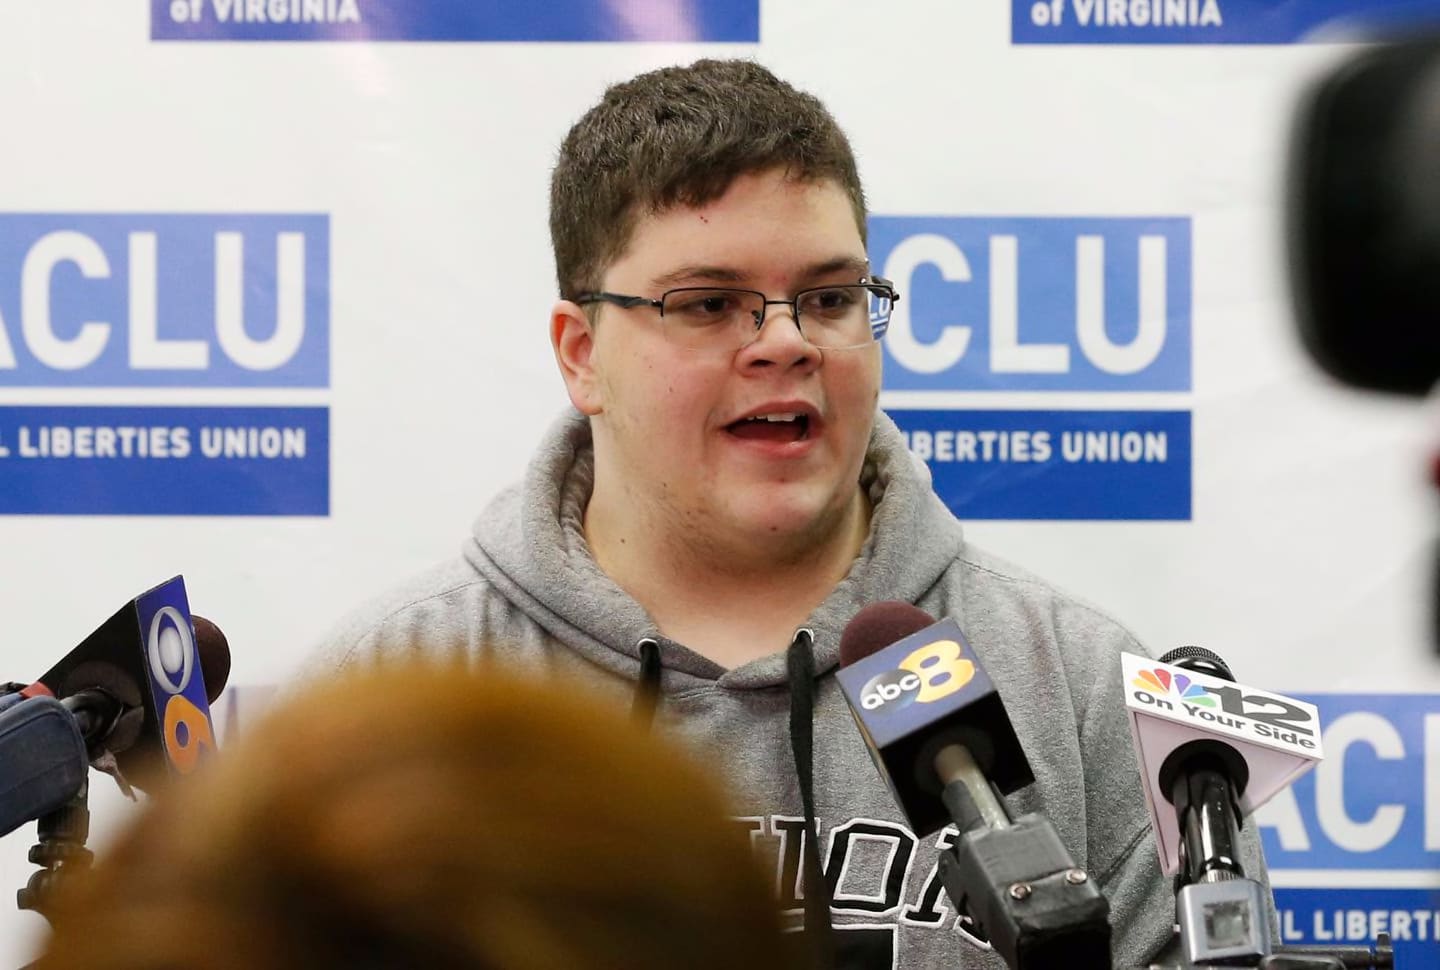 Gloucester County High School senior Gavin Grimm, a transgender student, spoke during a news conference in Richmond, Va. The Gloucester County School Board has agreed to pay $1.3 million in legal costs to the American Civil Liberties Union after the nonprofit spent six years representing a student who sued over the board's transgender bathroom ban.